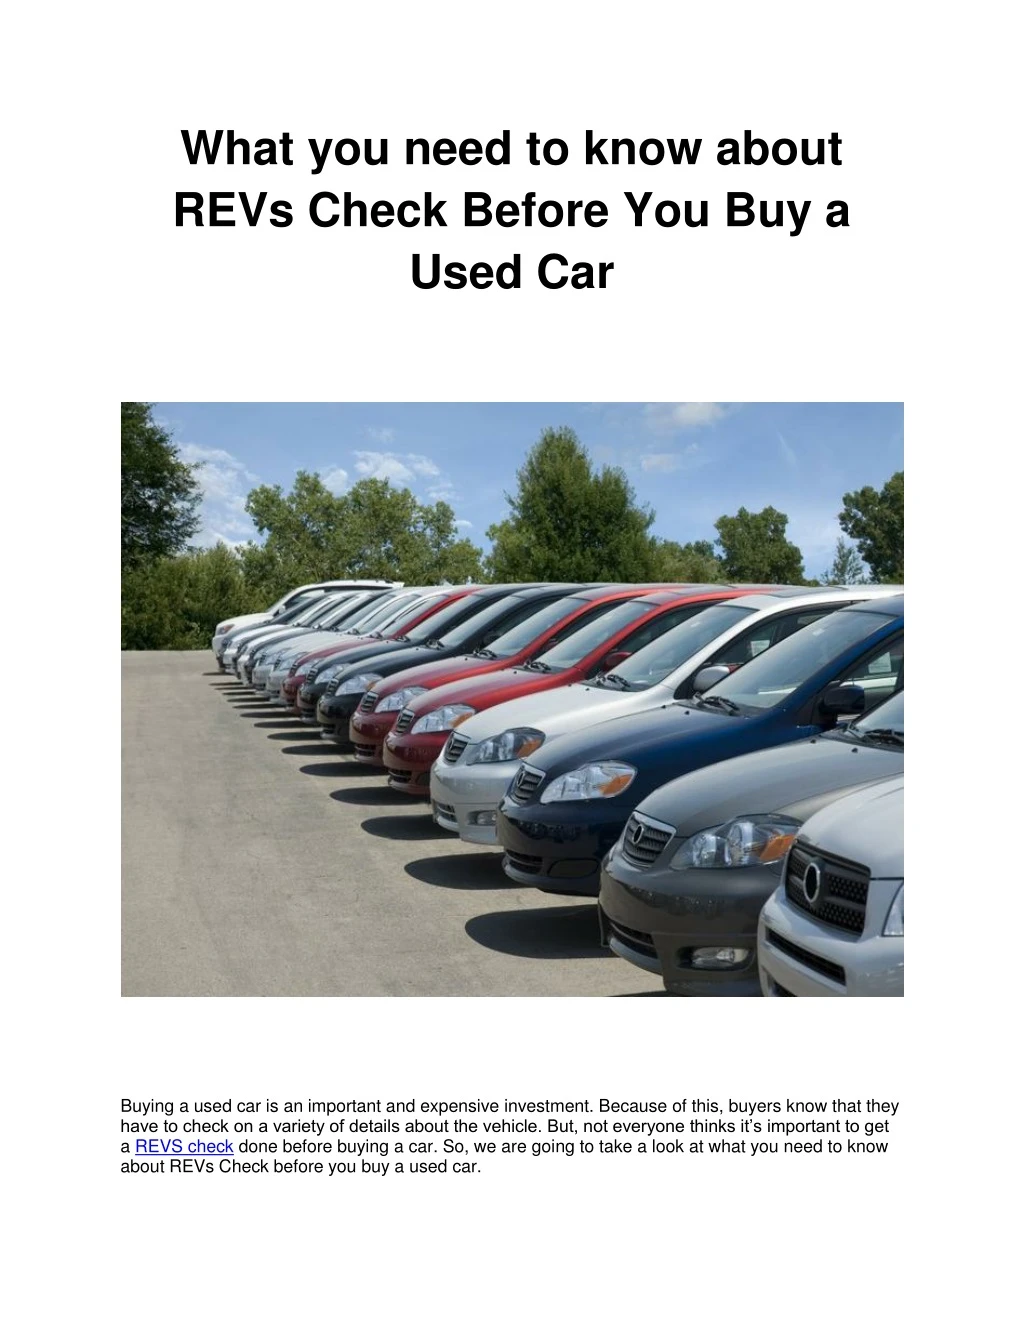 what you need to know about revs check before